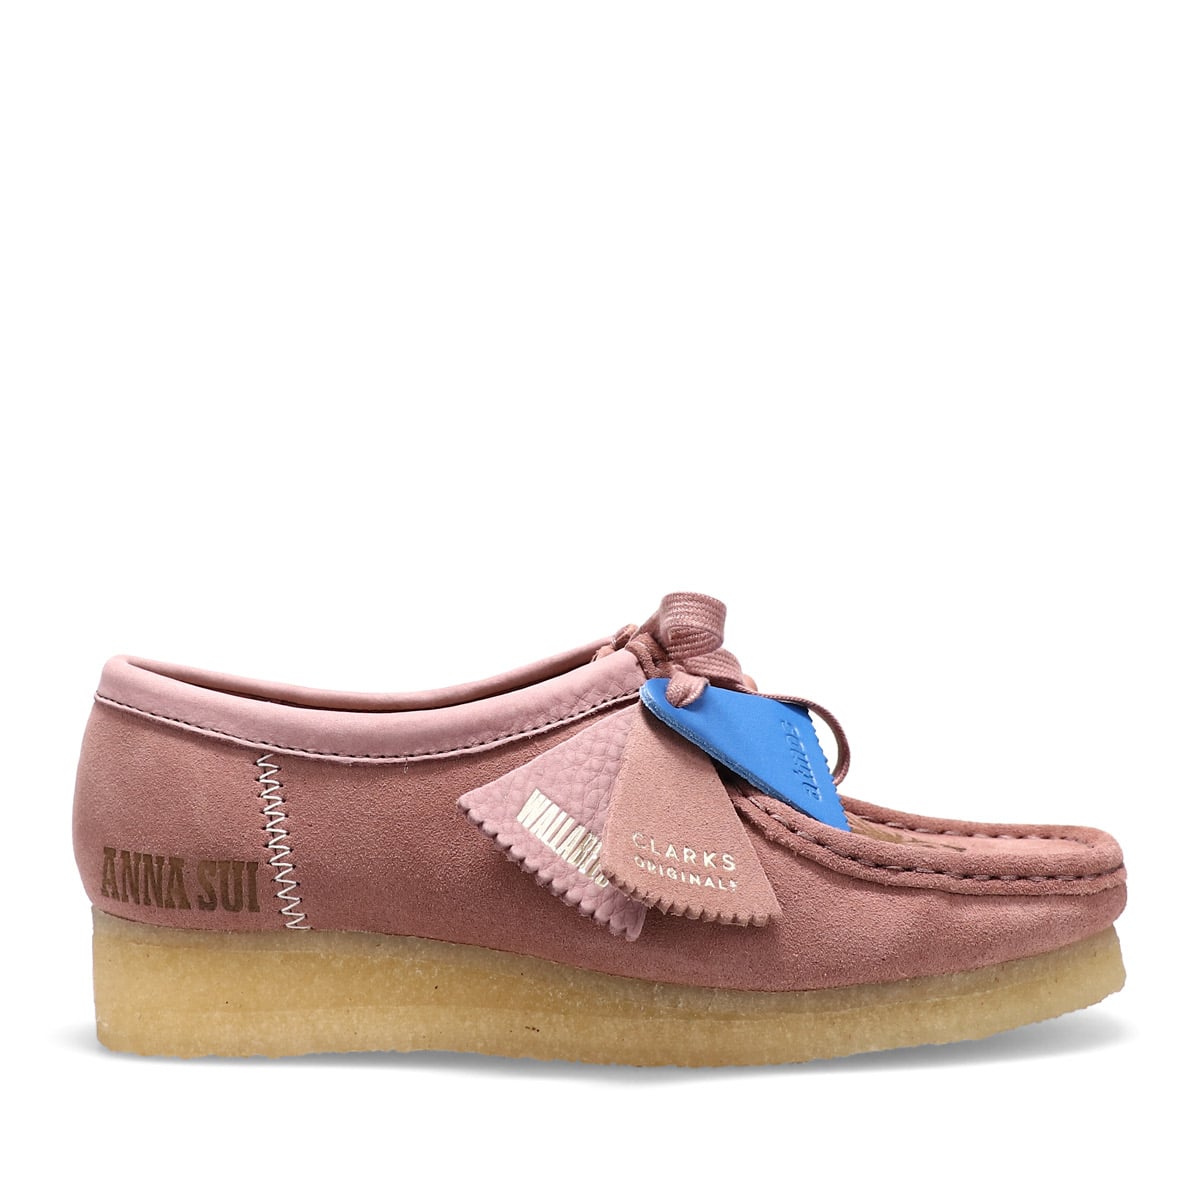 Clarks Wmns Wallabee ANNA SUI atmos Dusty Pink